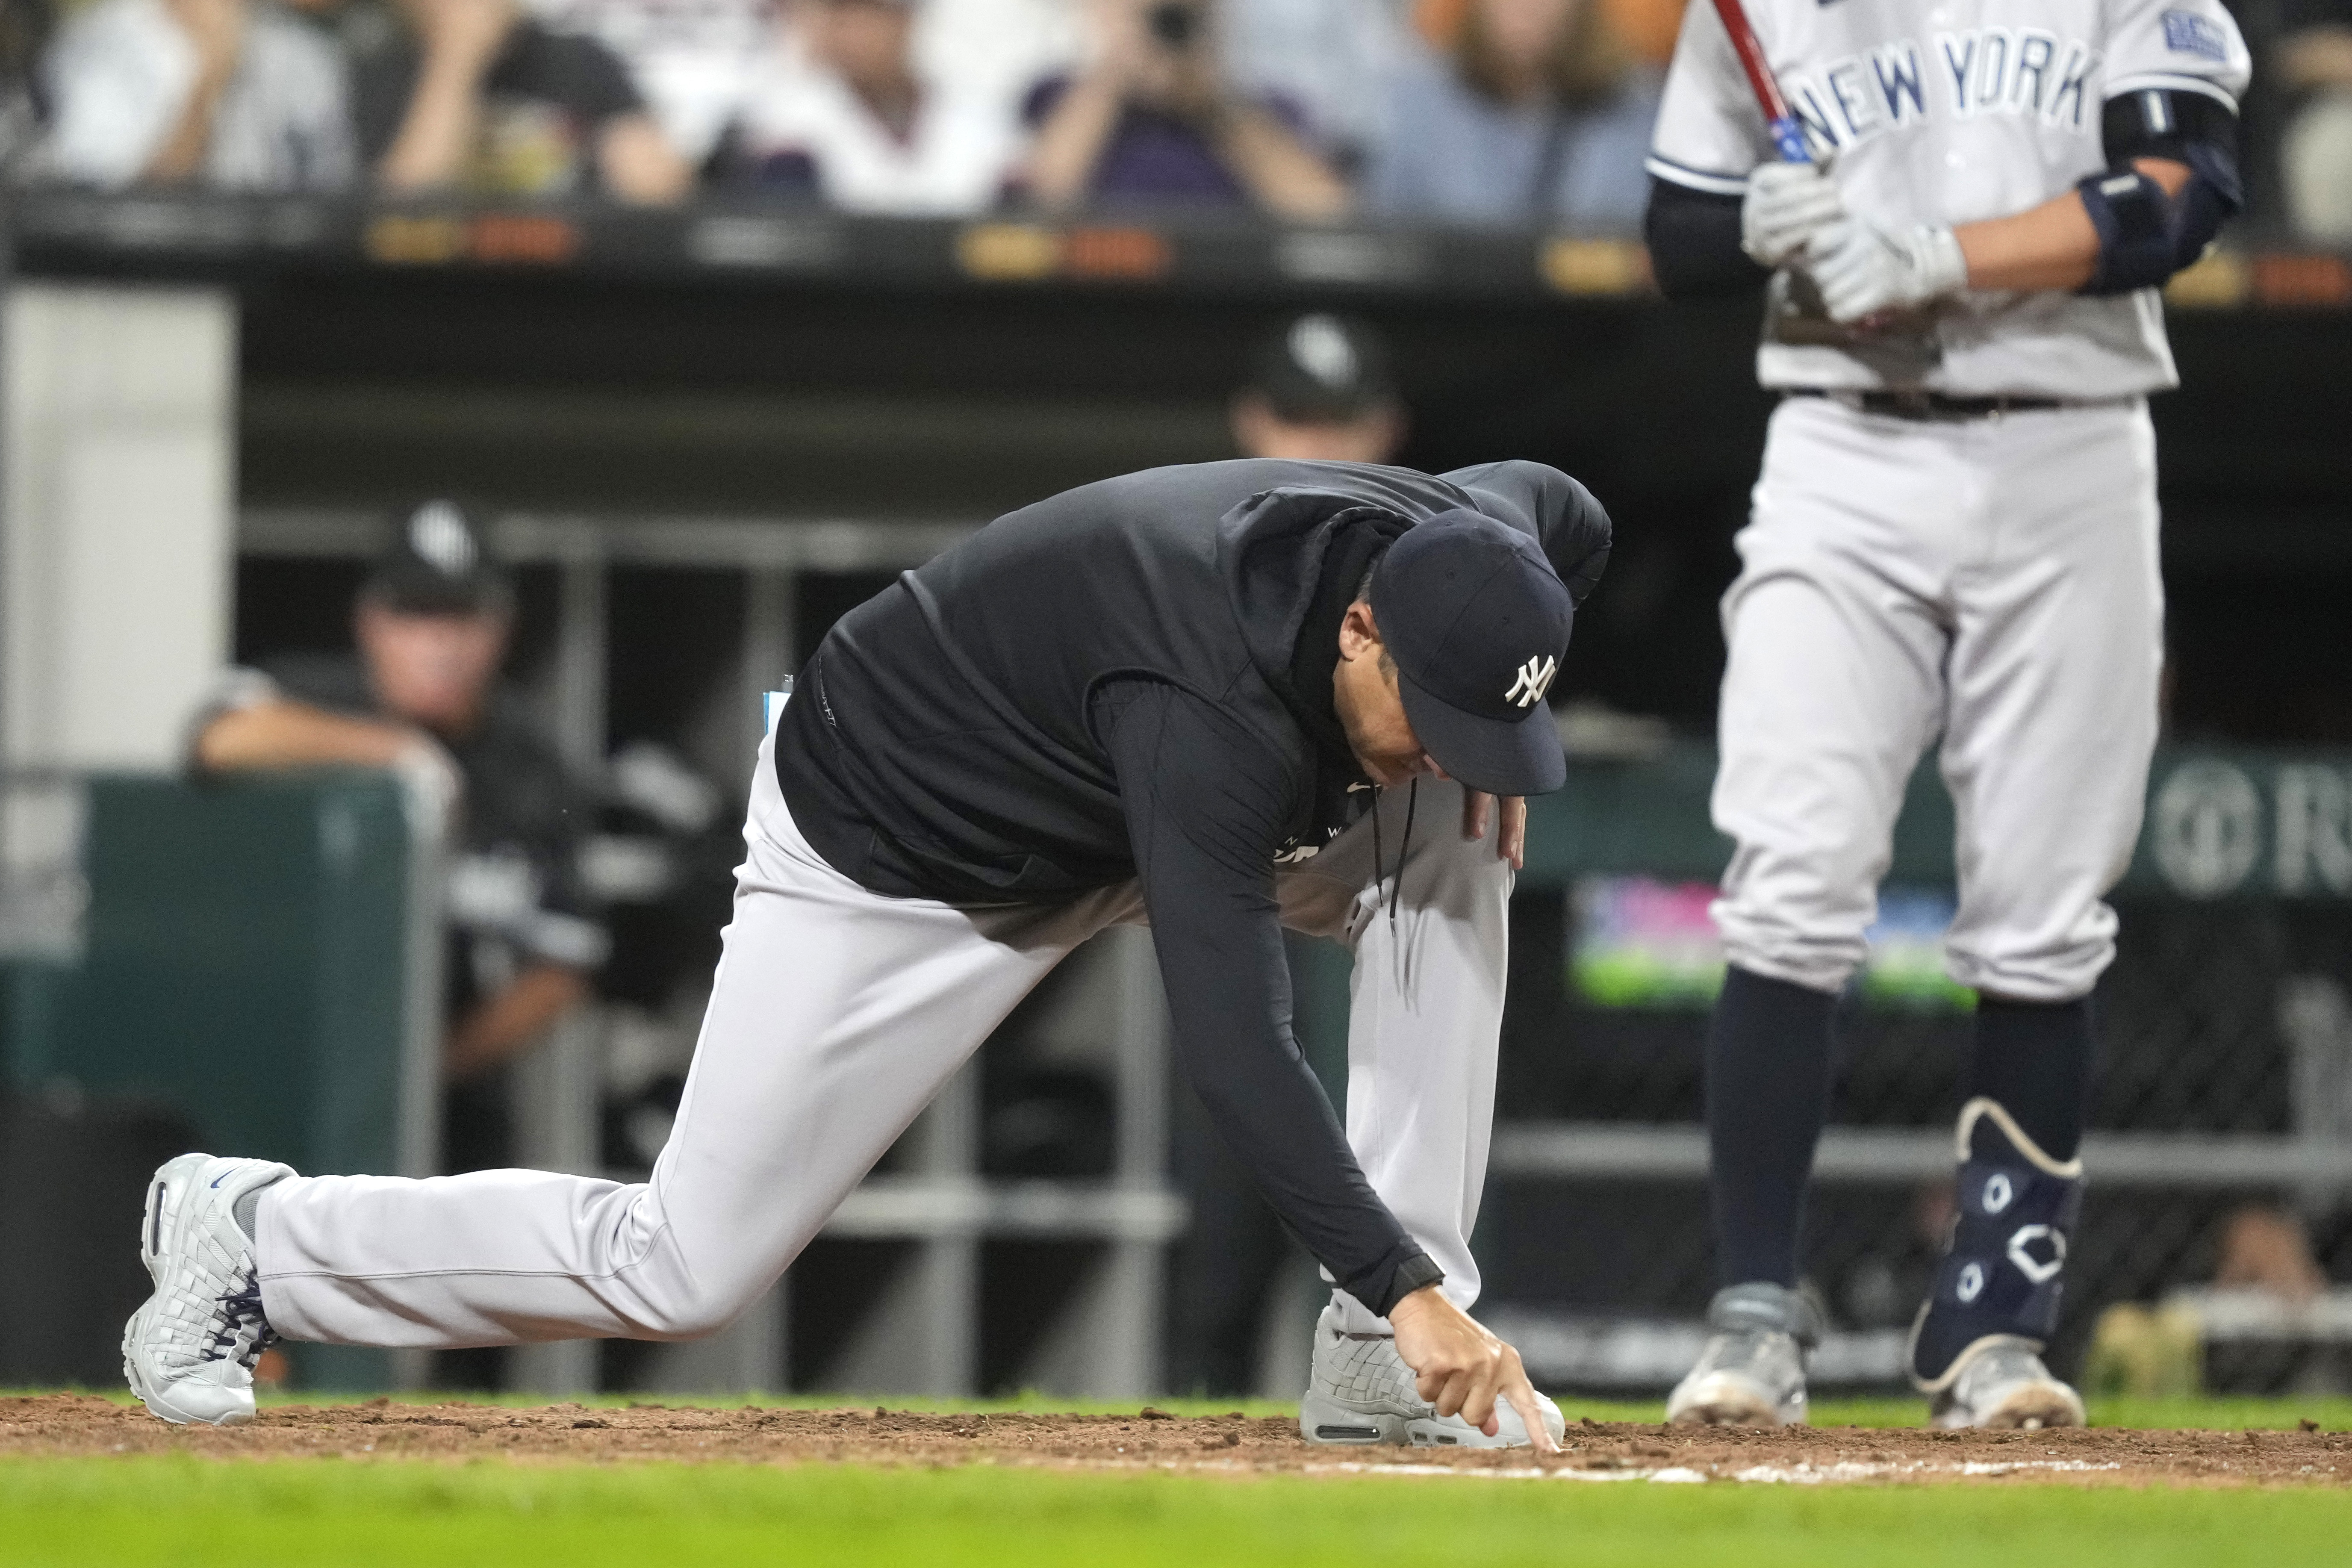 WATCH: Yankees' Aaron Boone imitates umpire after ejection, puts